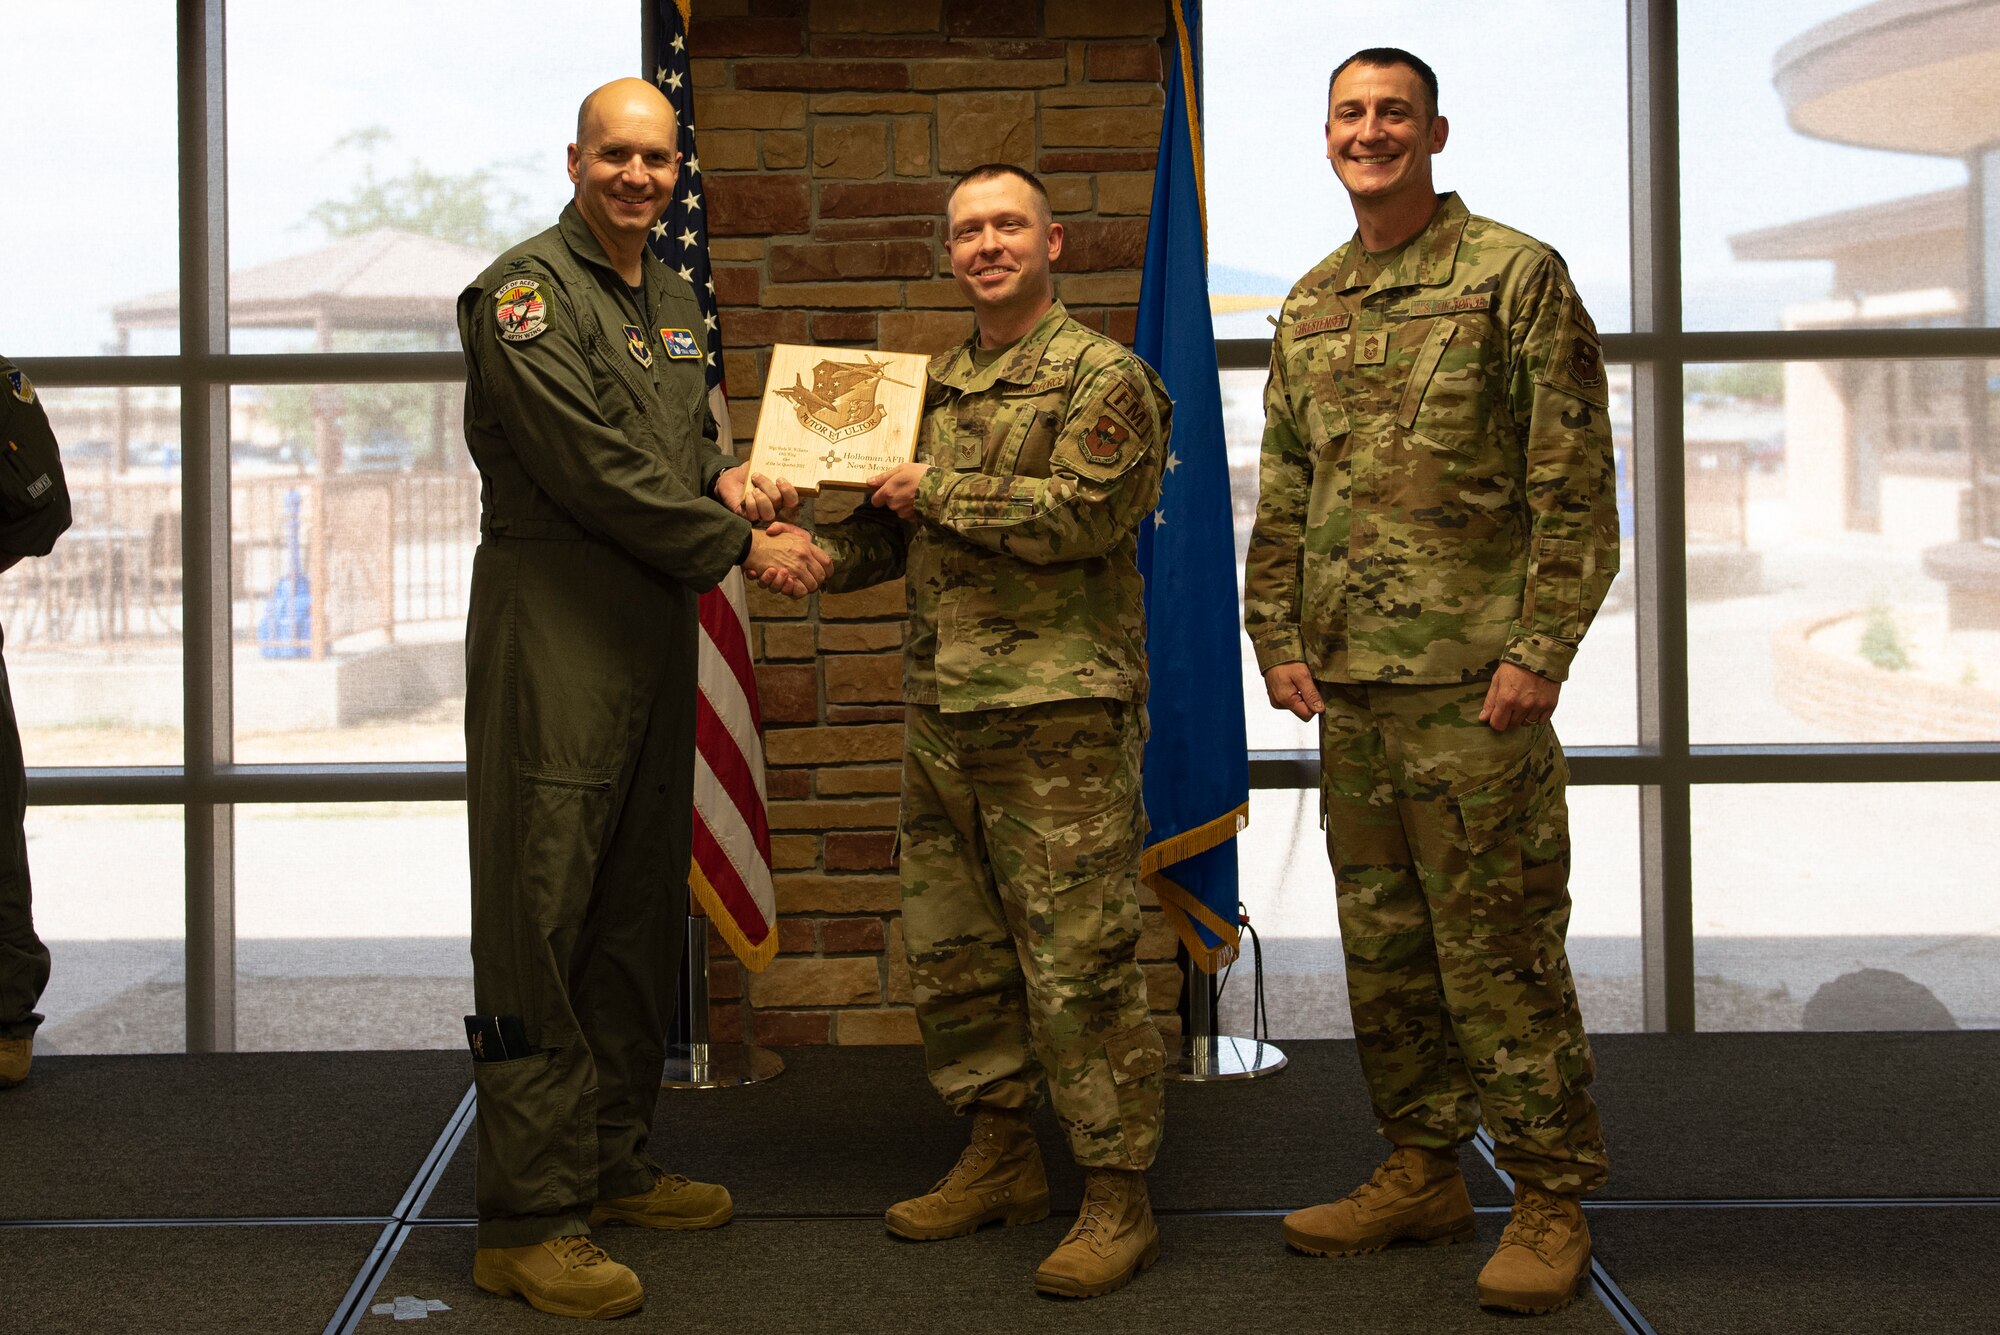 Staff Sgt. Wade Williams, from the 49th Comptroller Squadron, accepts the “49er” of the Quarter Award during the 49th Wing’s 1st quarter awards ceremony, June 10, 2022, on Holloman Air Force Base, New Mexico.